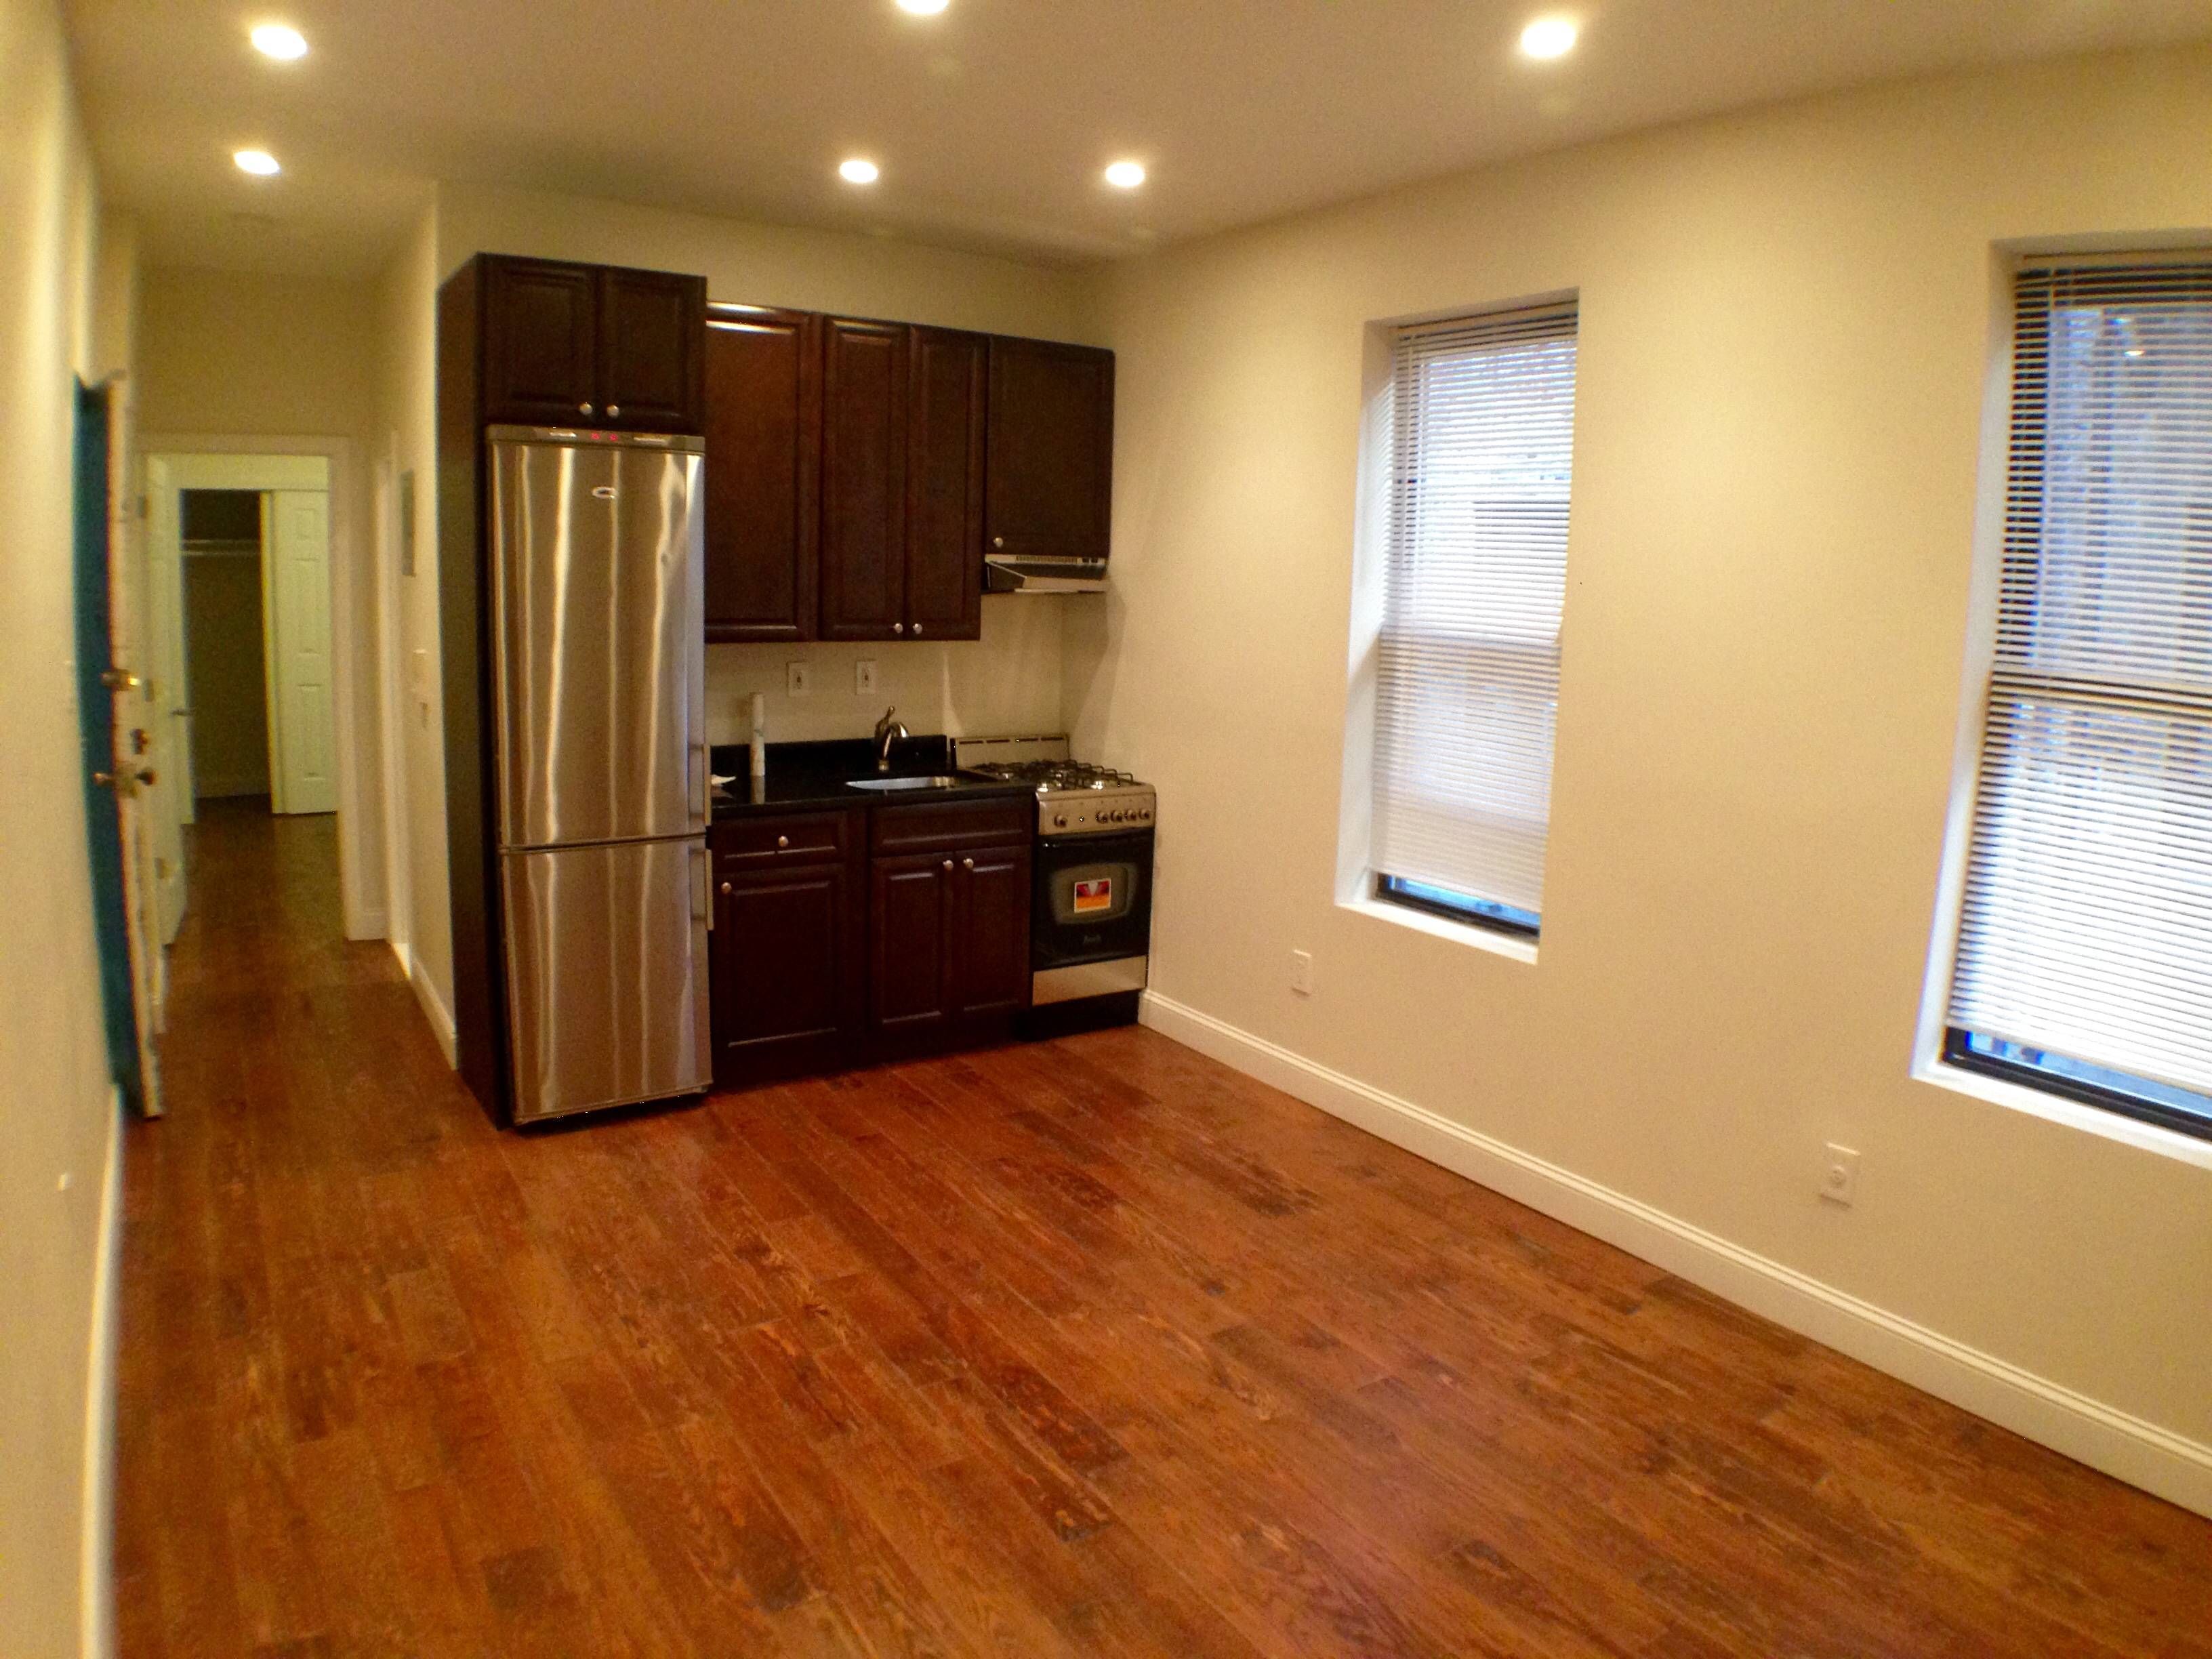 Astoria Newly Renovated luxury finished 1 bedroom $1850.00 Broadway N/Q vicinity 